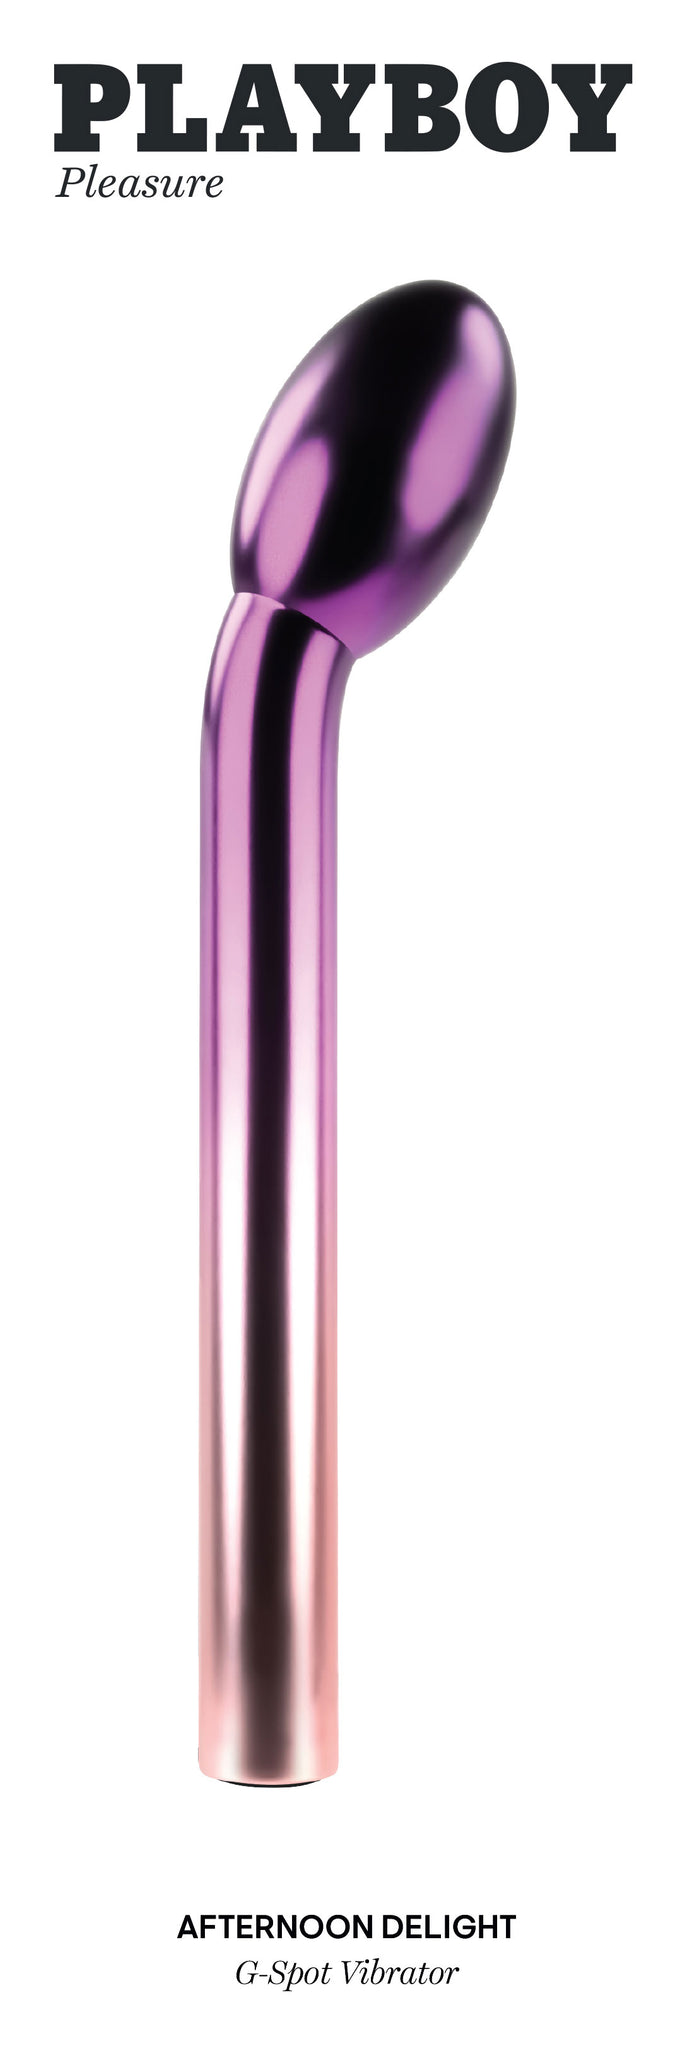 Playboy Pleasure - Afternoon Delight - G-Spot Vibrator - Ombre